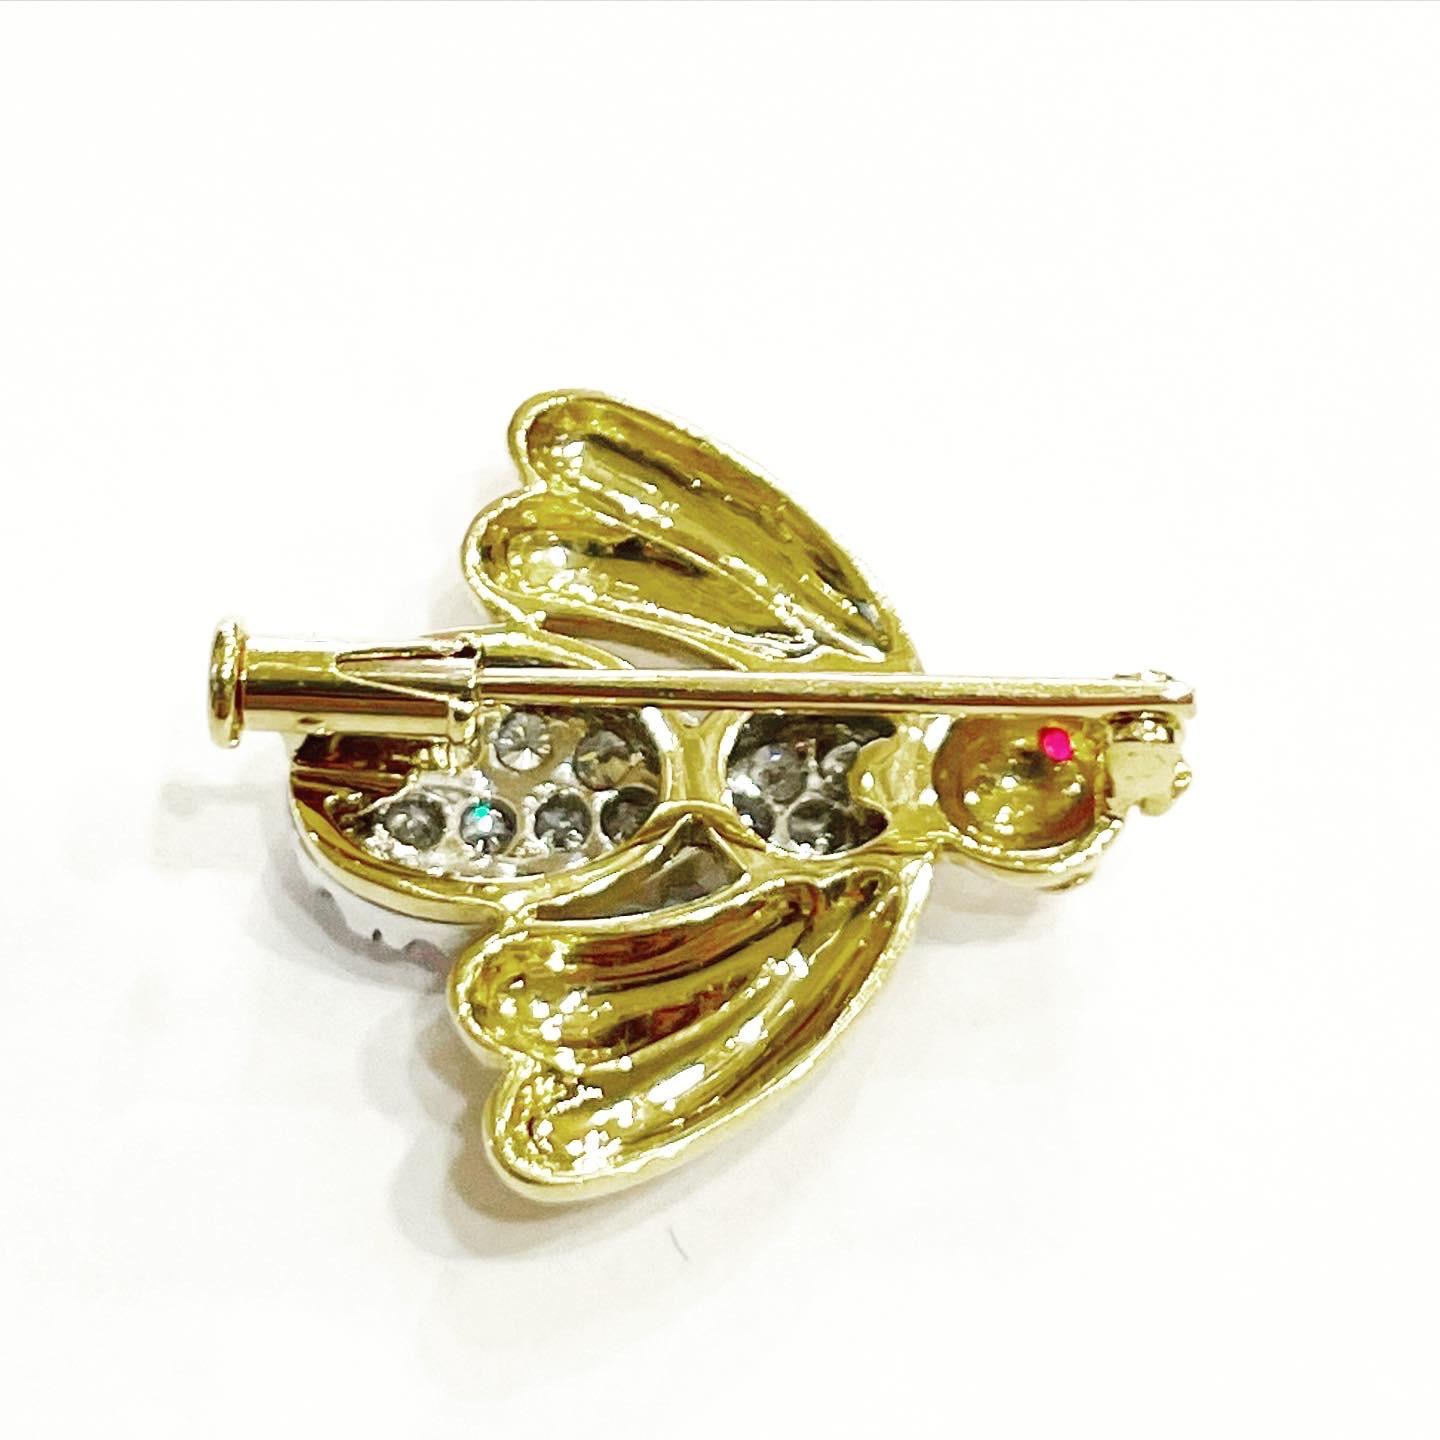 Amazing and original 18 Kt yellow gold bee brooch with pavé setting white diamonds and rubies eyes.
Looks perfect on a Business Jacket or on a Cocktail Dress.
18 Kt White and Yellow Gold.
Circa 1950.
Total diamonds: 0.8 carats,
Total rubies: 0,04